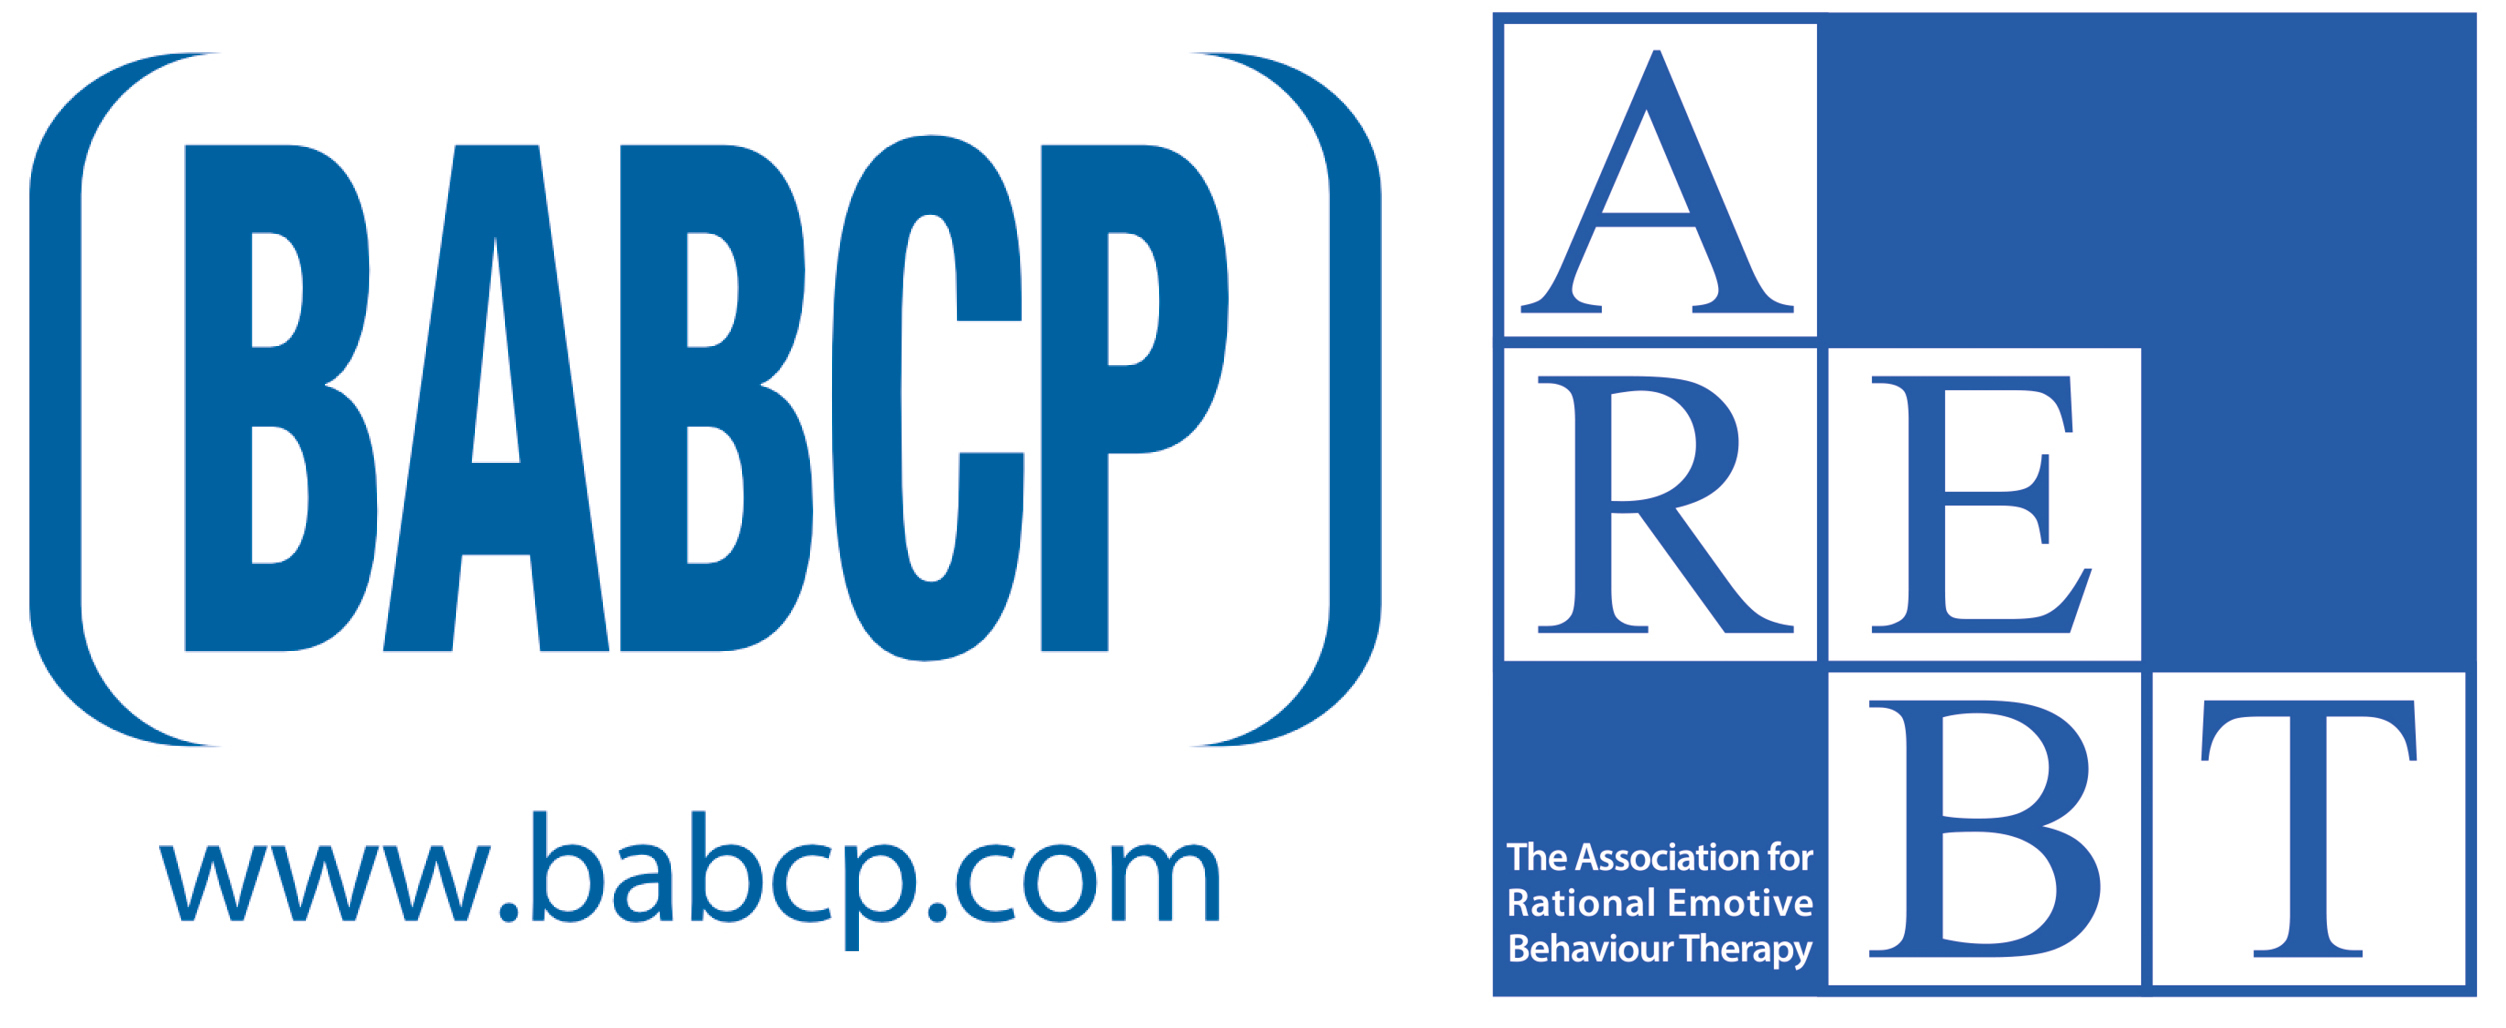 Image showing the joint logos for BABCP and AREBT who run the CBT register